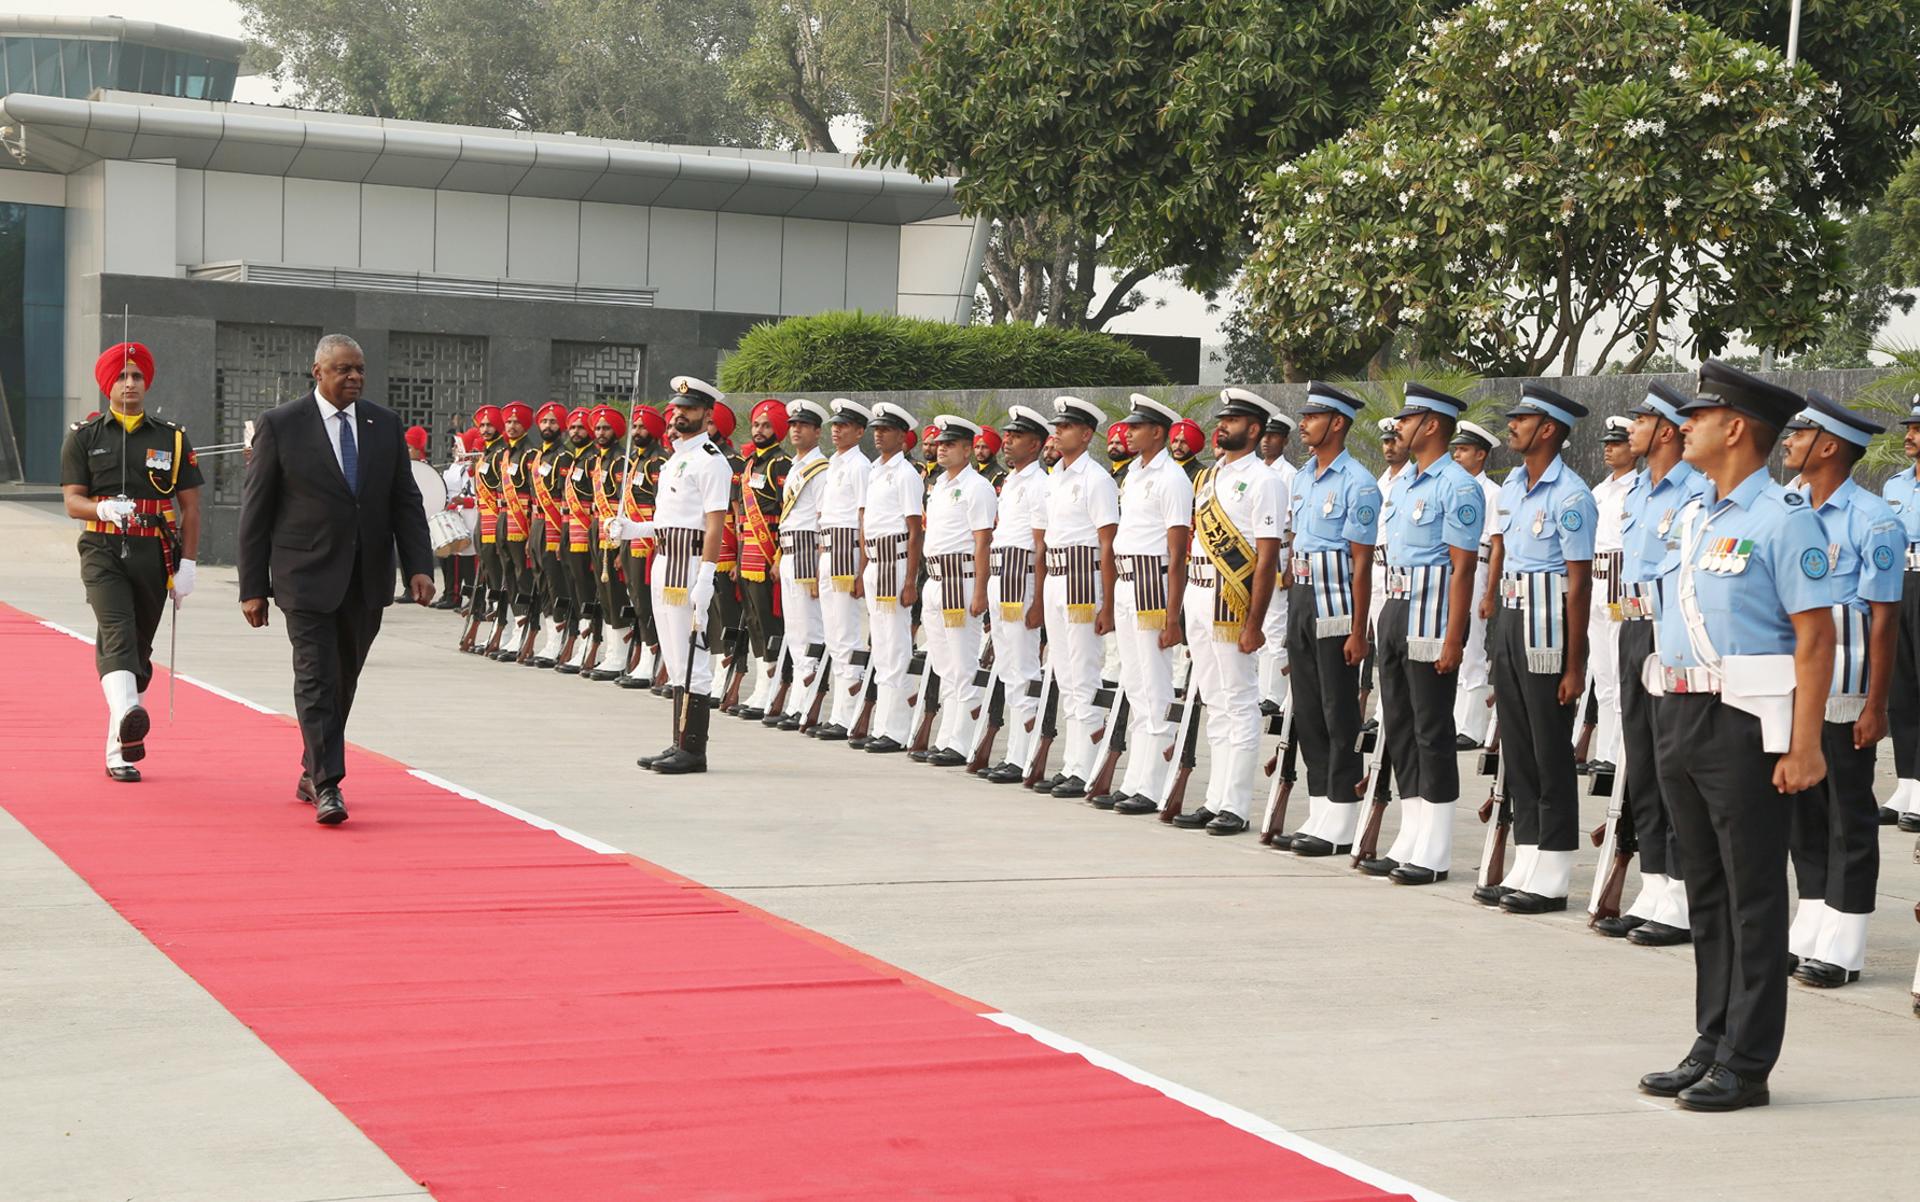 A handout photo made available by the Indian Ministry of Defence shows US Secretary of Defense Lloyd Austin inspecting guards of honor upon his arrival at the Palam airport in New Delhi, India, 09 November 2023. EFE/EPA/INDIAN MINISTRY OF DEFENCE HANDOUT HANDOUT EDITORIAL USE ONLY/NO SALES HANDOUT EDITORIAL USE ONLY/NO SALES
